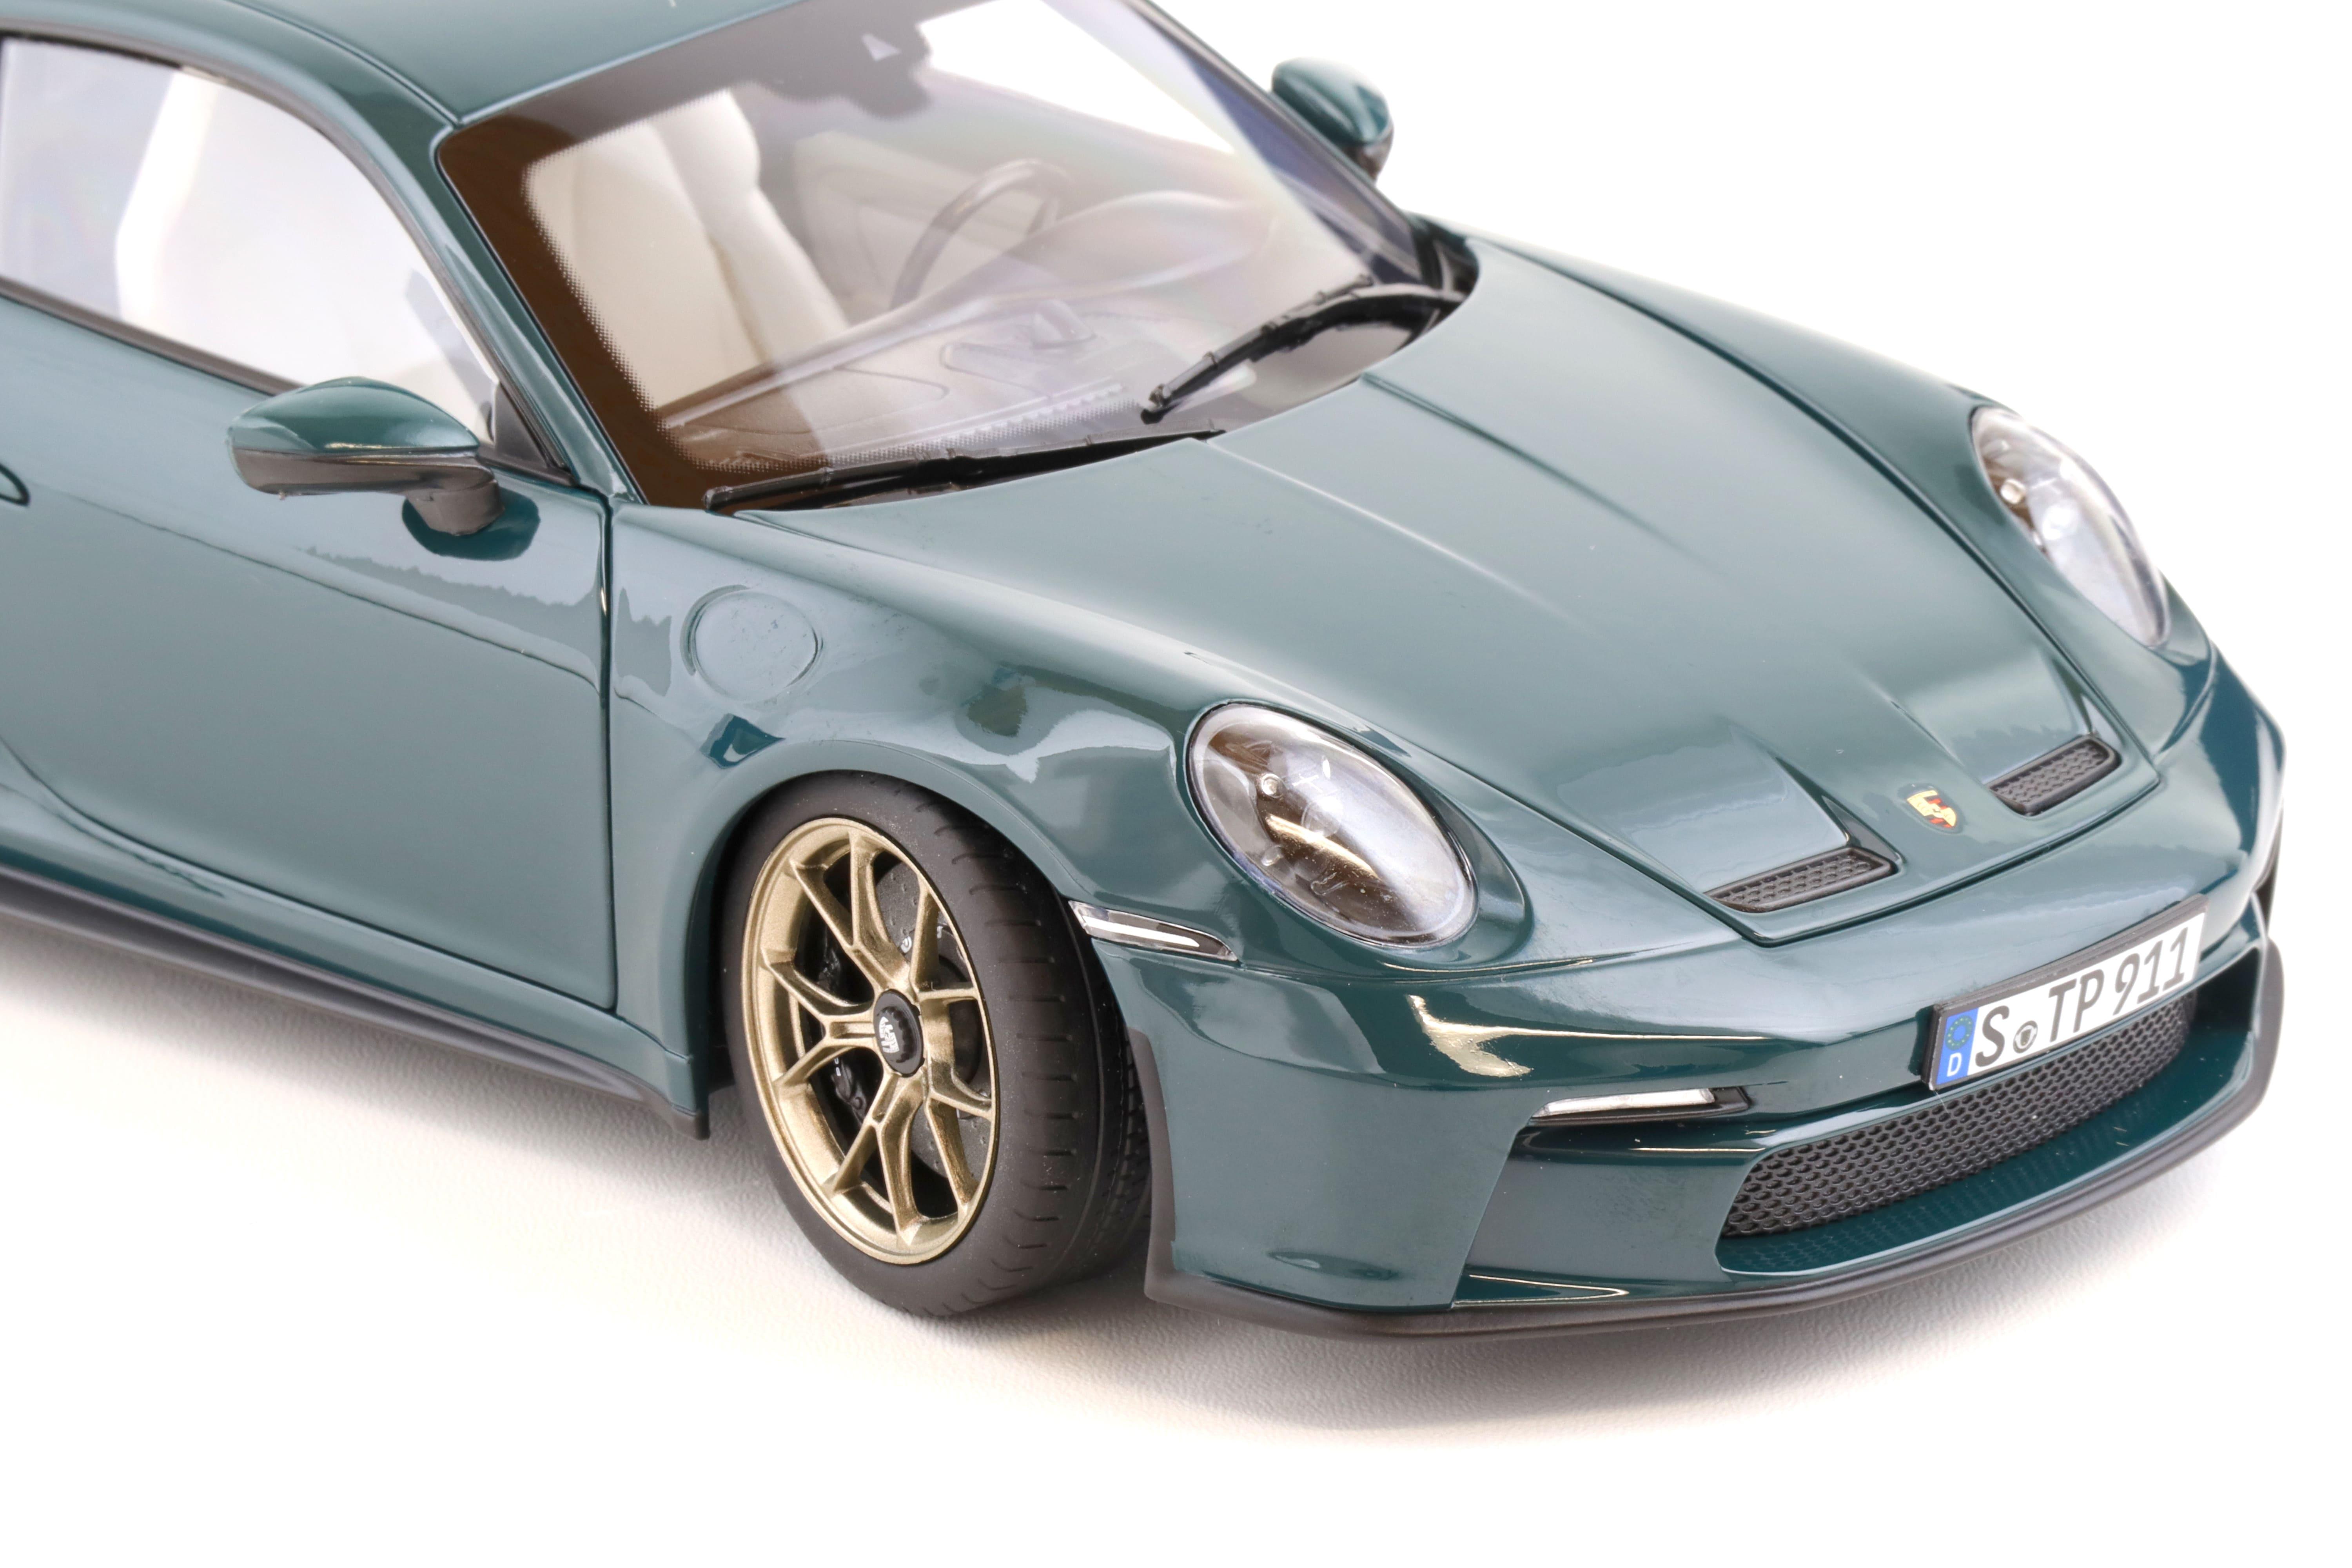 1:18 Norev Porsche 911 (992) GT3 Touring 2021 PTS Fjord green - Limited 504 pcs.